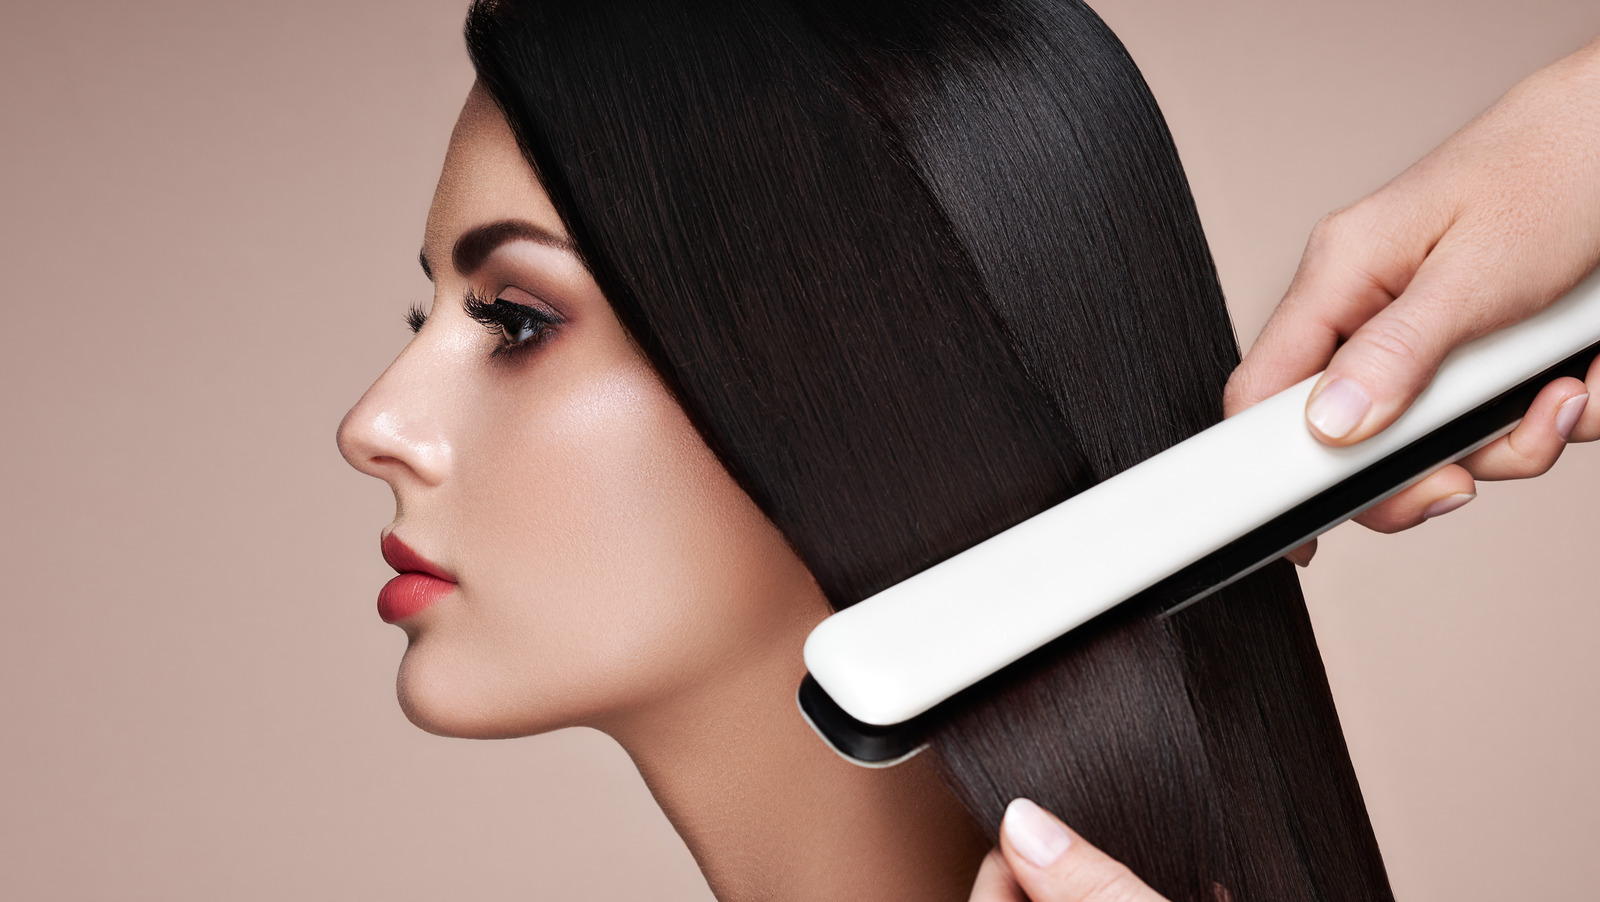 Why You Should Use Argan Oil On Your Hair Before Heat Styling